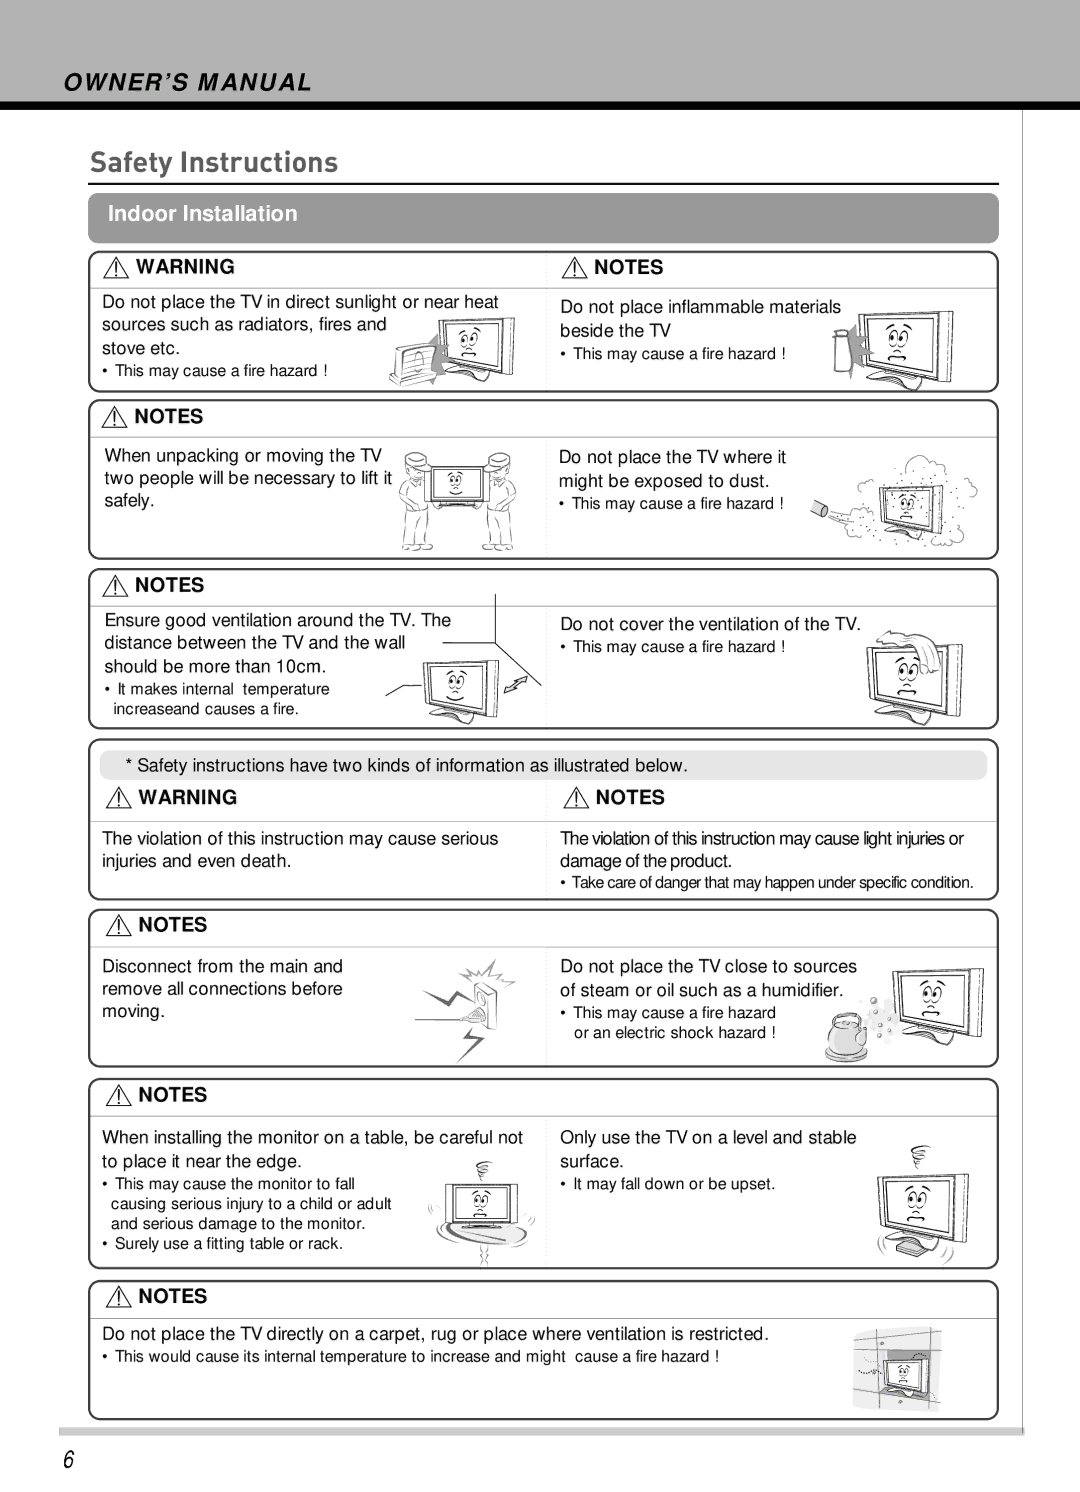 Hyundai IT HLT-2672 owner manual Safety Instructions, Indoor Installation 